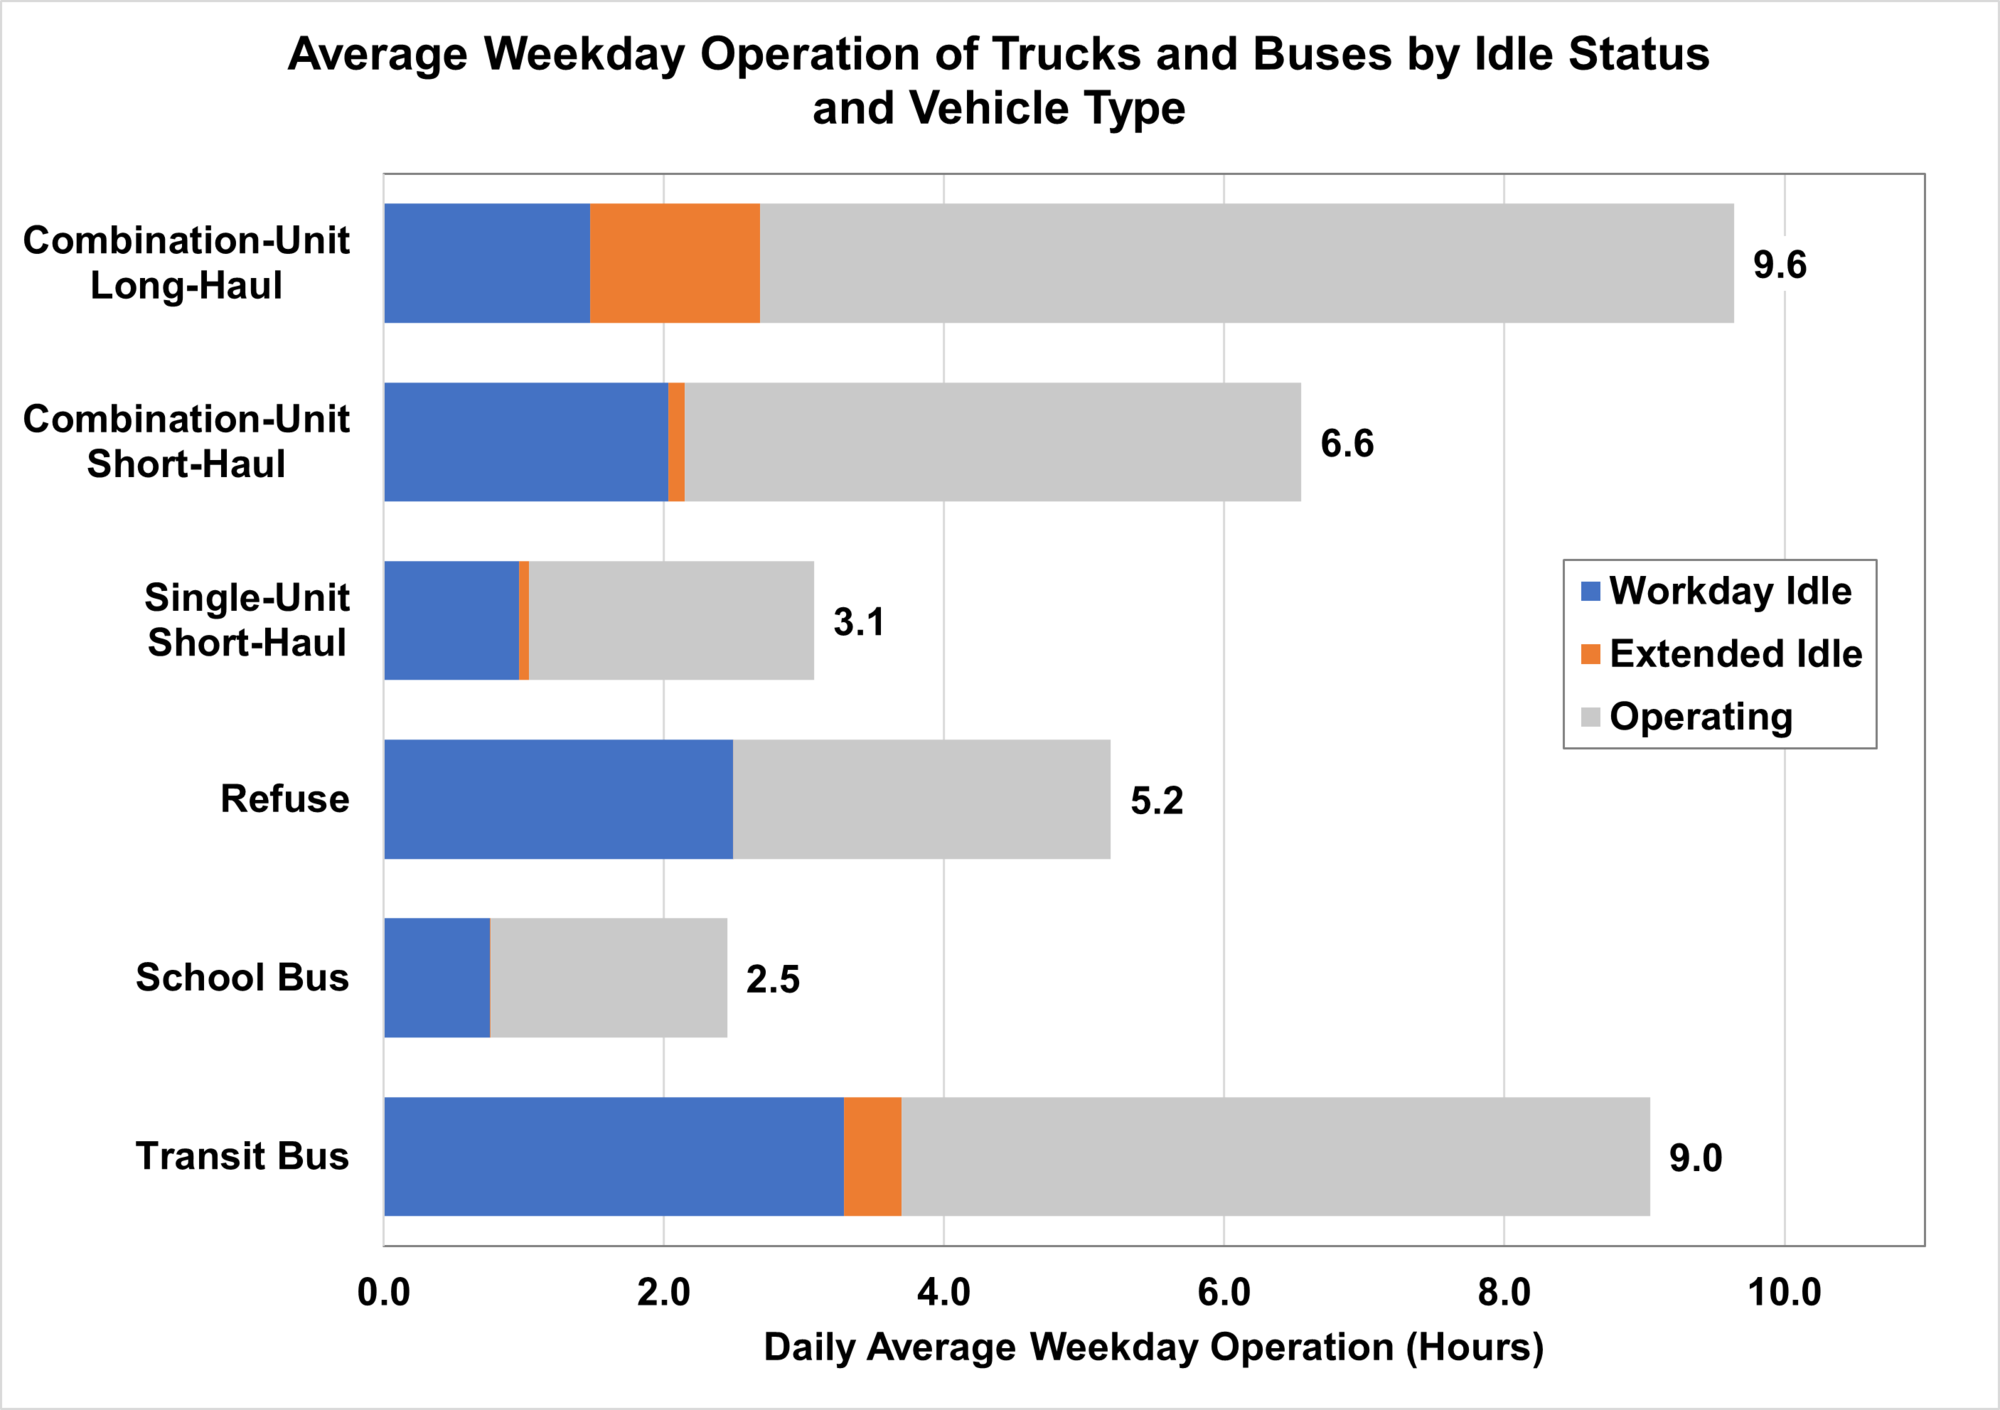 Average Weekday Operation of Trucks and Buses by Idle Status and Vehicle Type